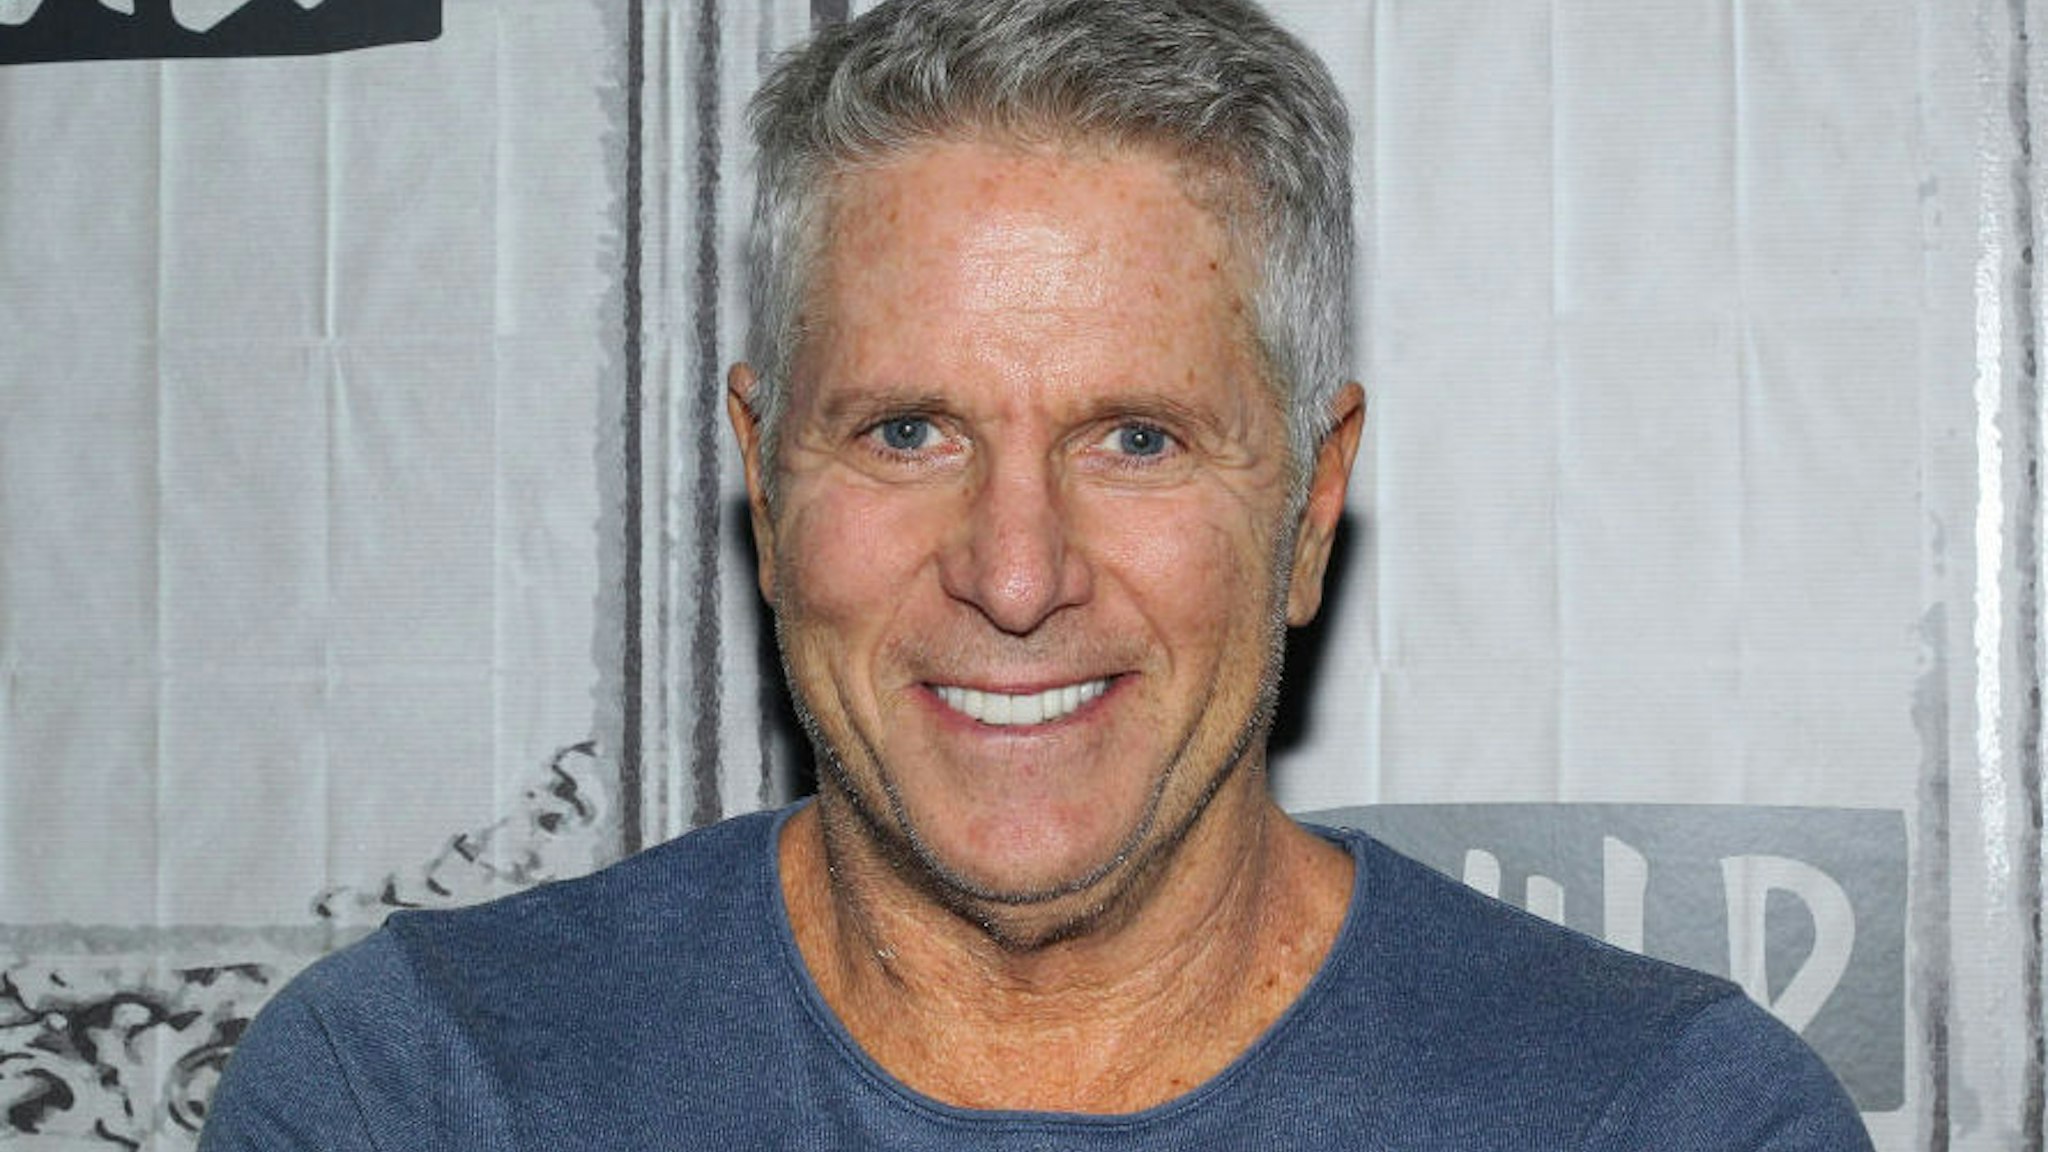 NEW YORK, NEW YORK - JUNE 24: TV Personality Donny Deutsch attends the Build Series to discuss "Saturday Night Politics" at Build Studio on June 24, 2019 in New York City.